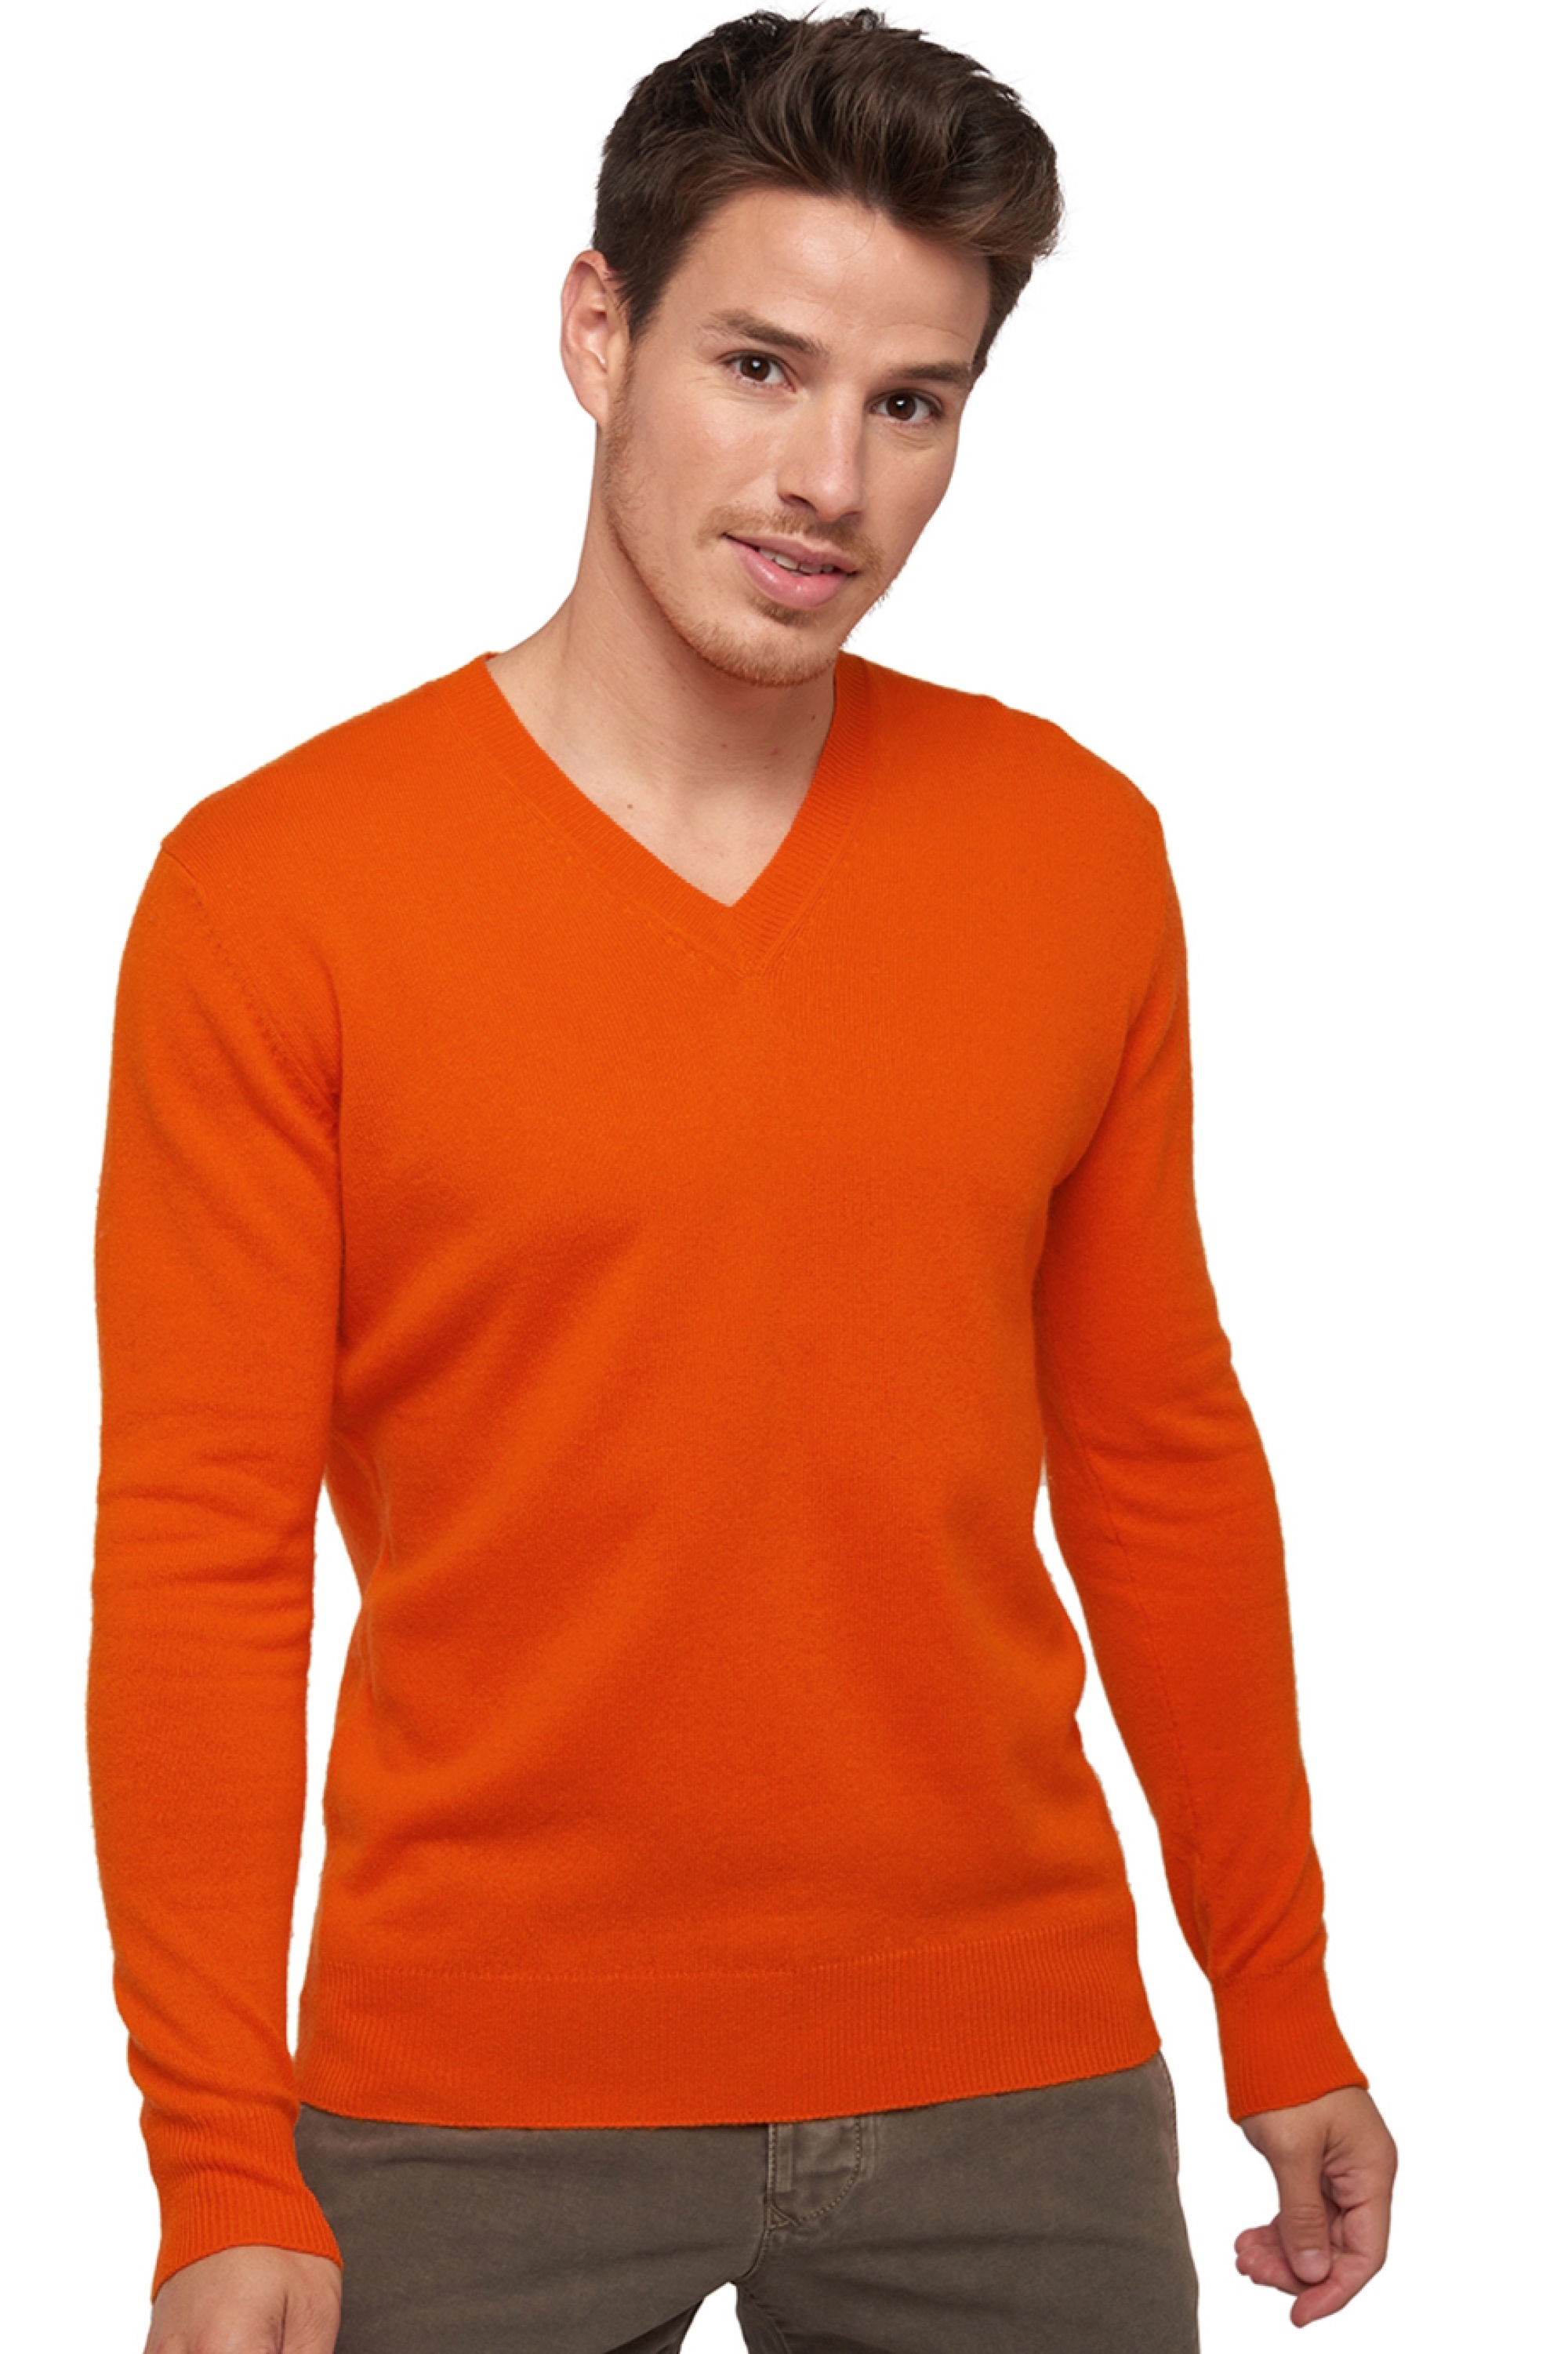 Cashmere men low prices tor first satsuma l